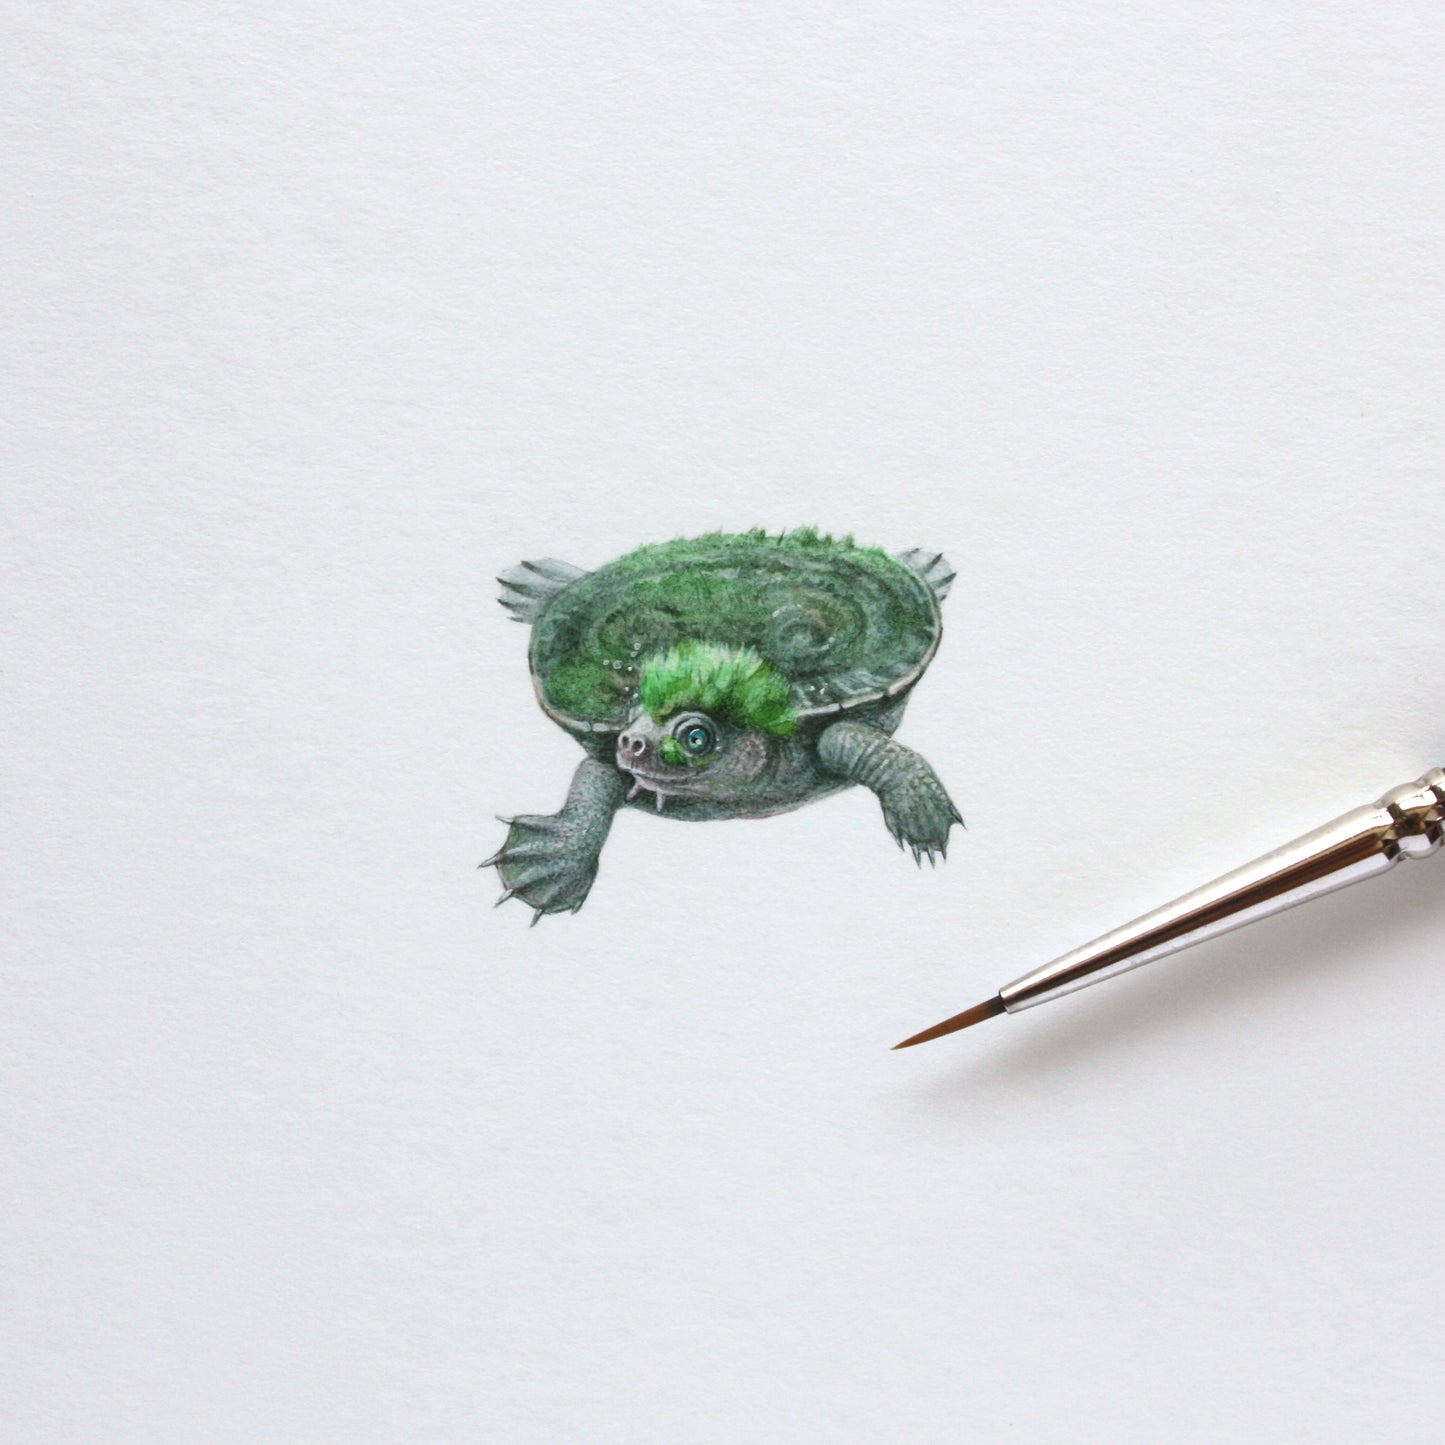 PRINT of watercolor miniature painting. Mary River Turtle